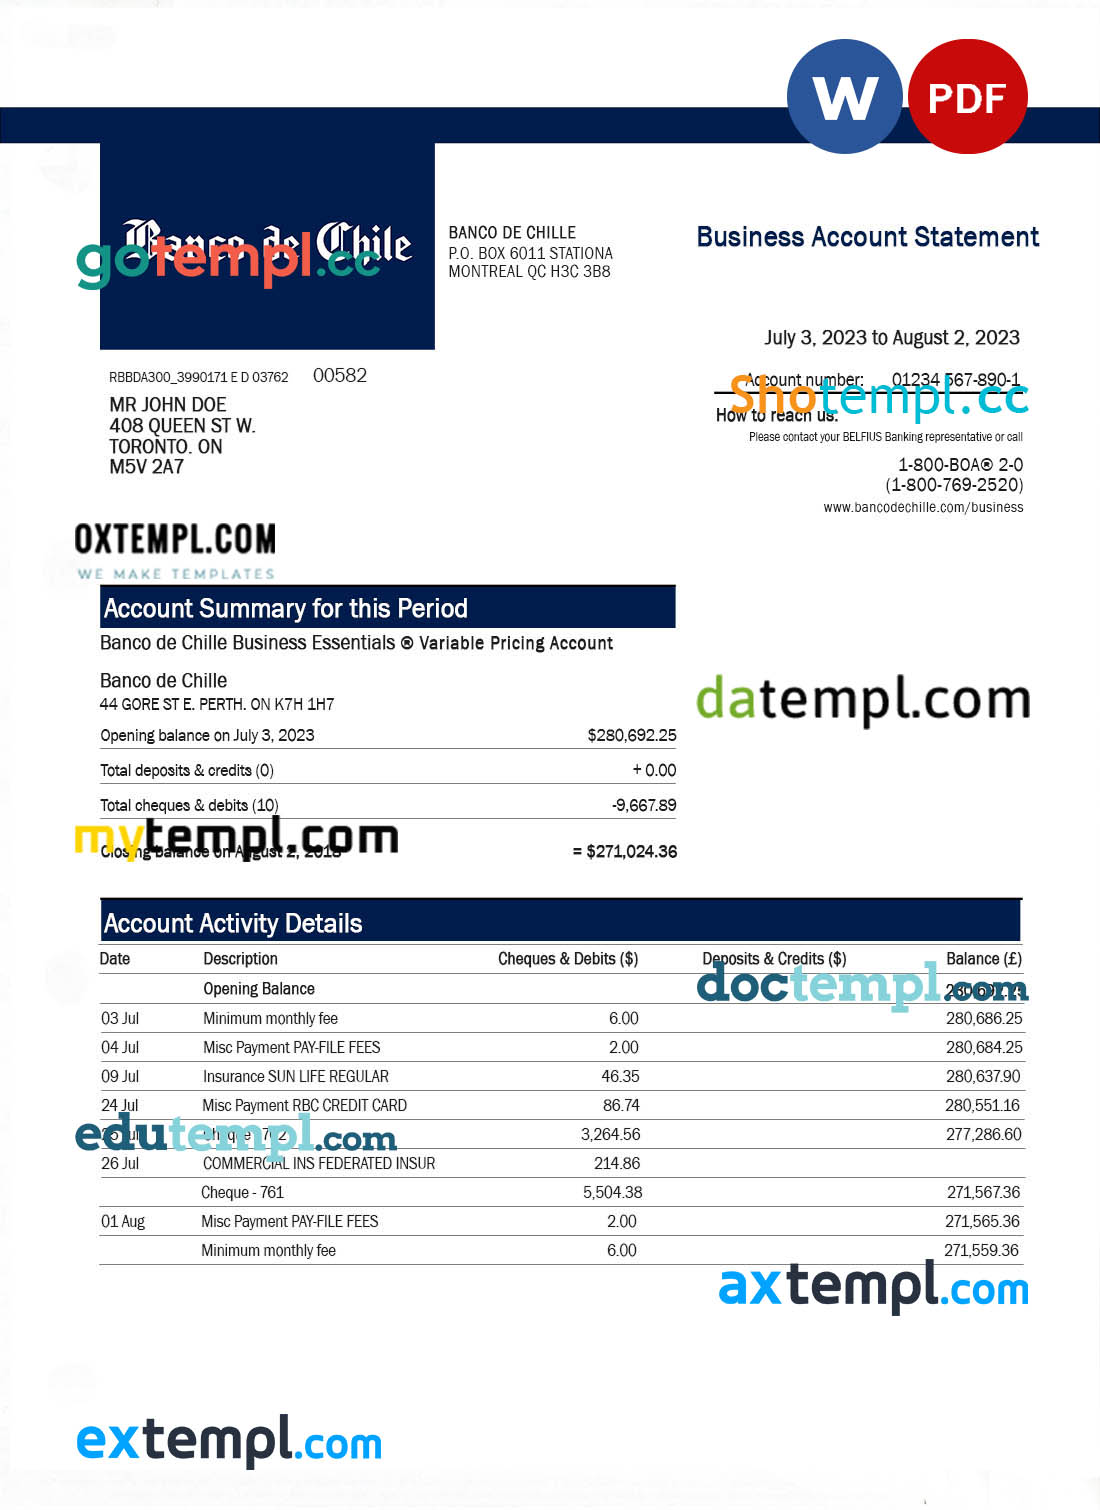 Capital One bank corporate account statement Word and PDF template